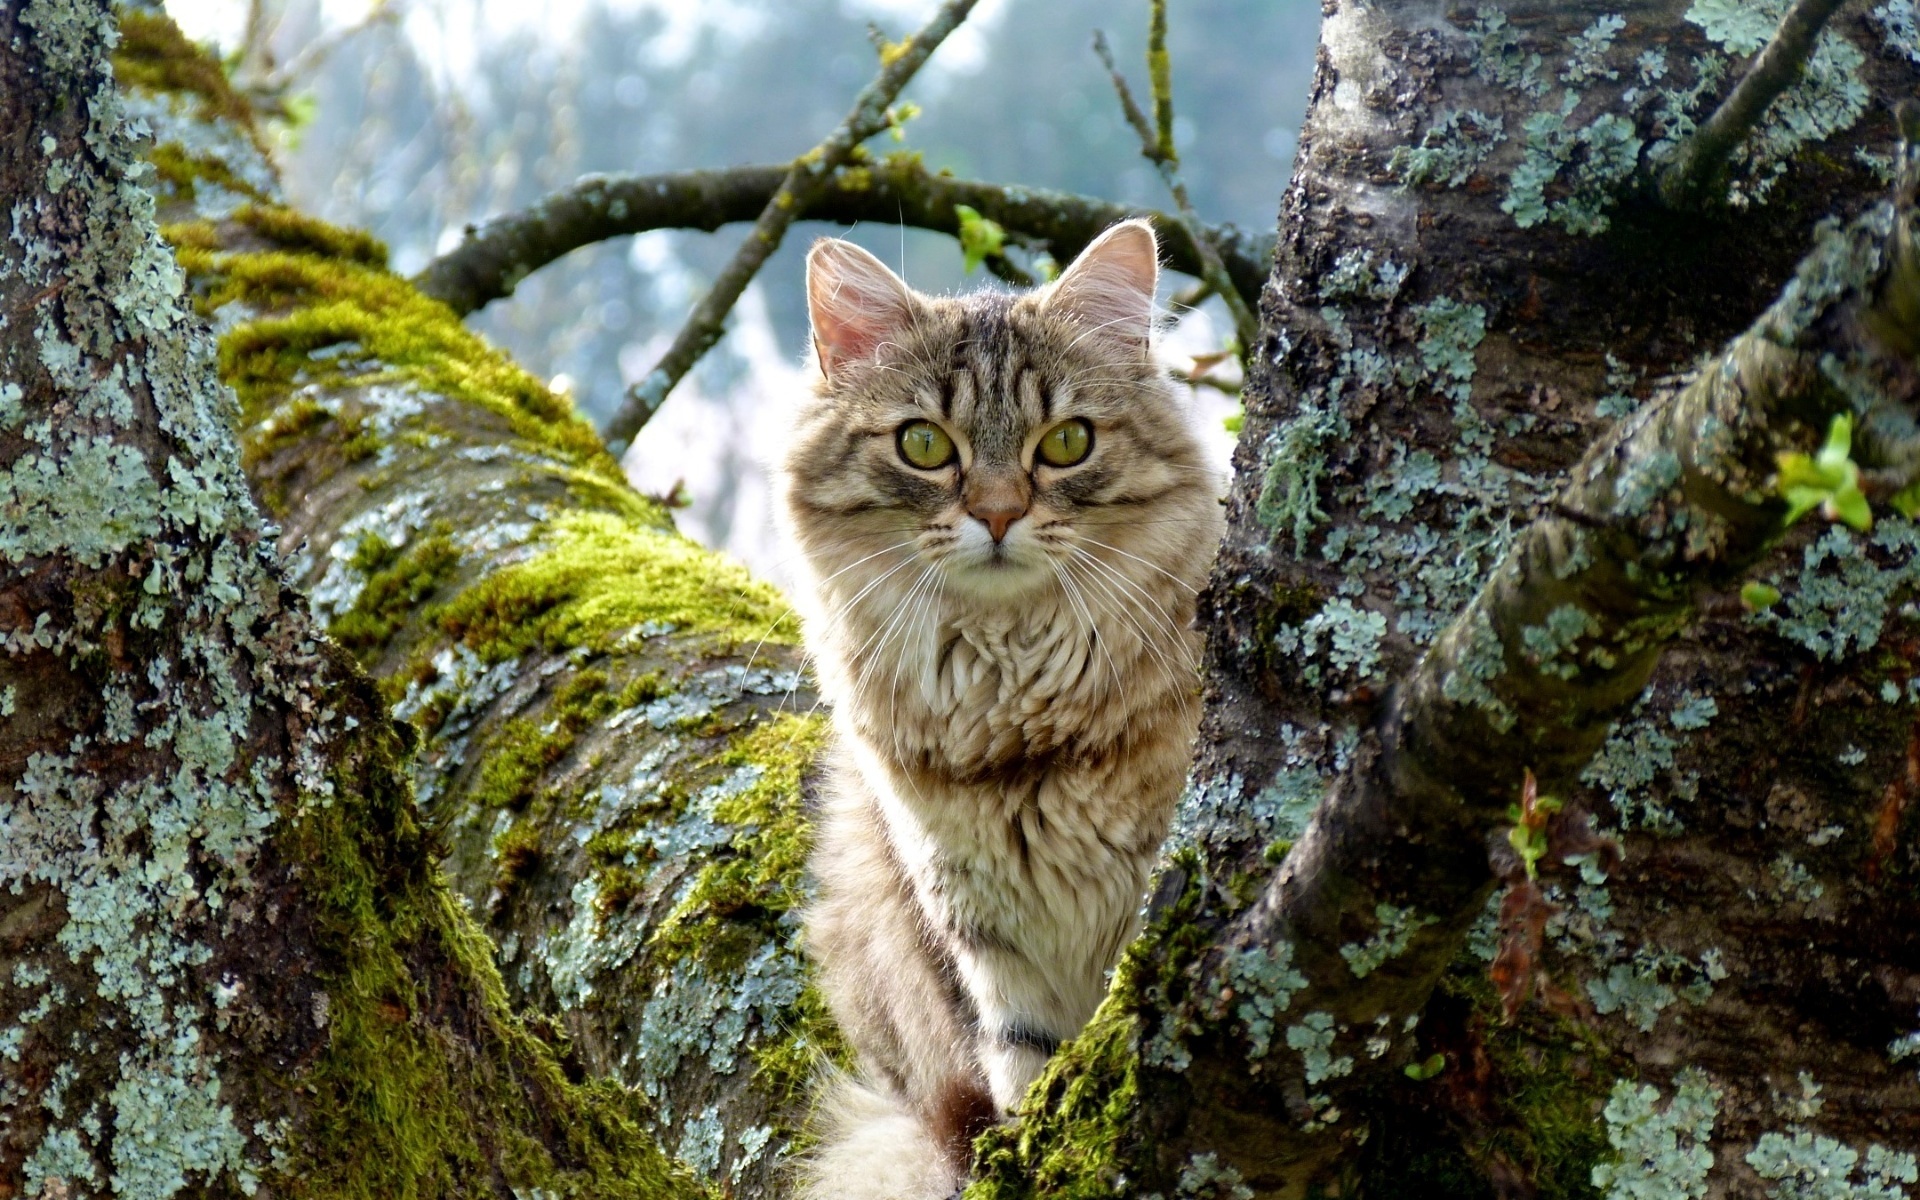 animals, Cats, Trees, Eyes, Face, Whiskers, Nature, Fur, Ears, Nose, Moss, Photgraphy Wallpaper